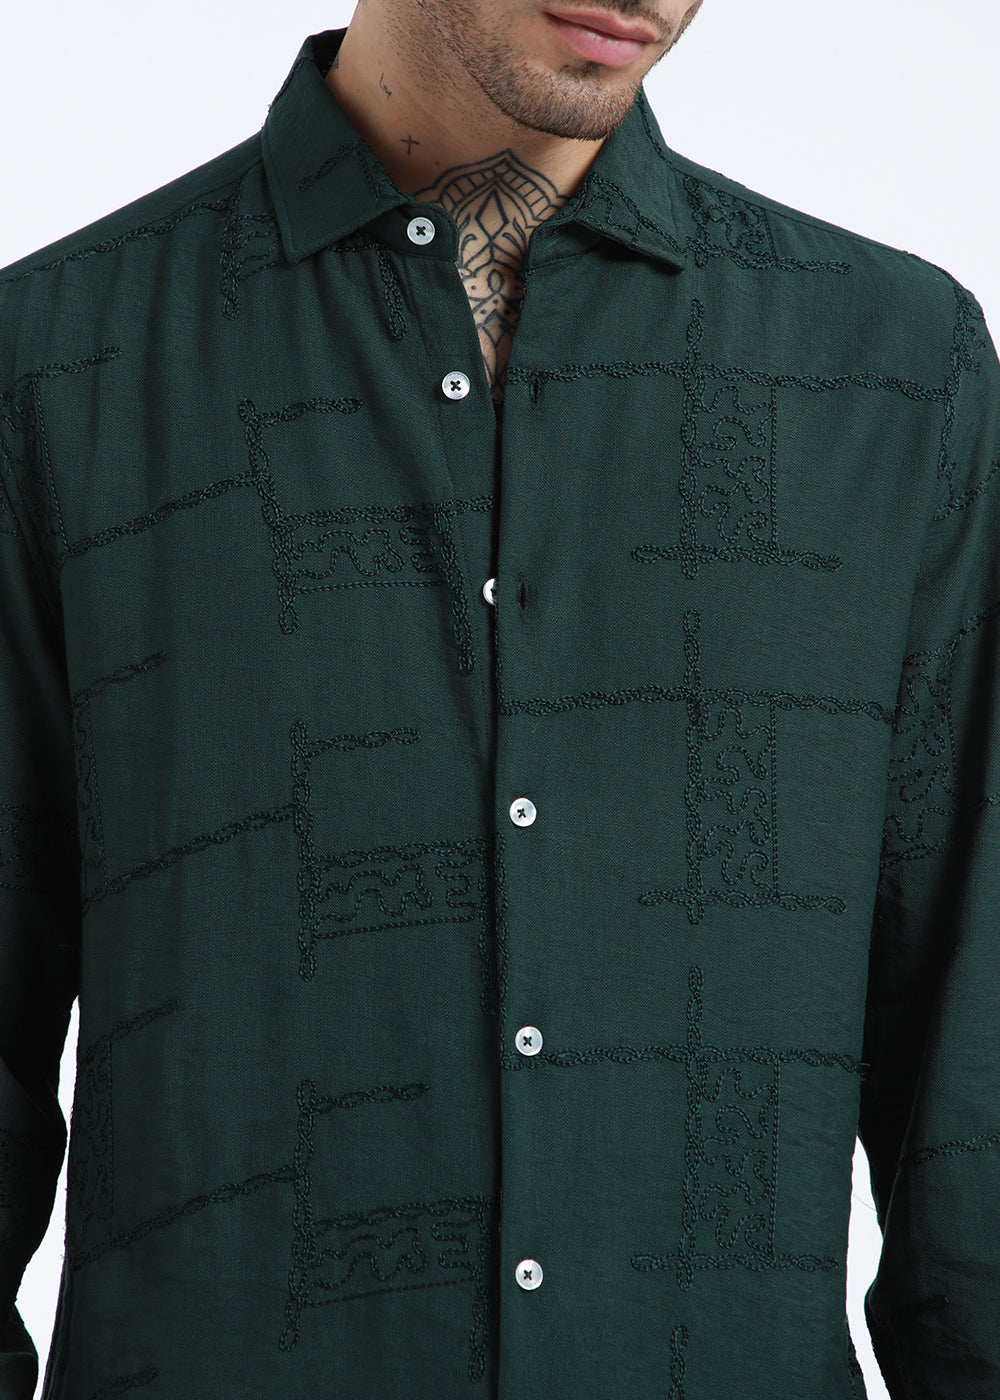 Teal Green Curvy Embroidery Shirt